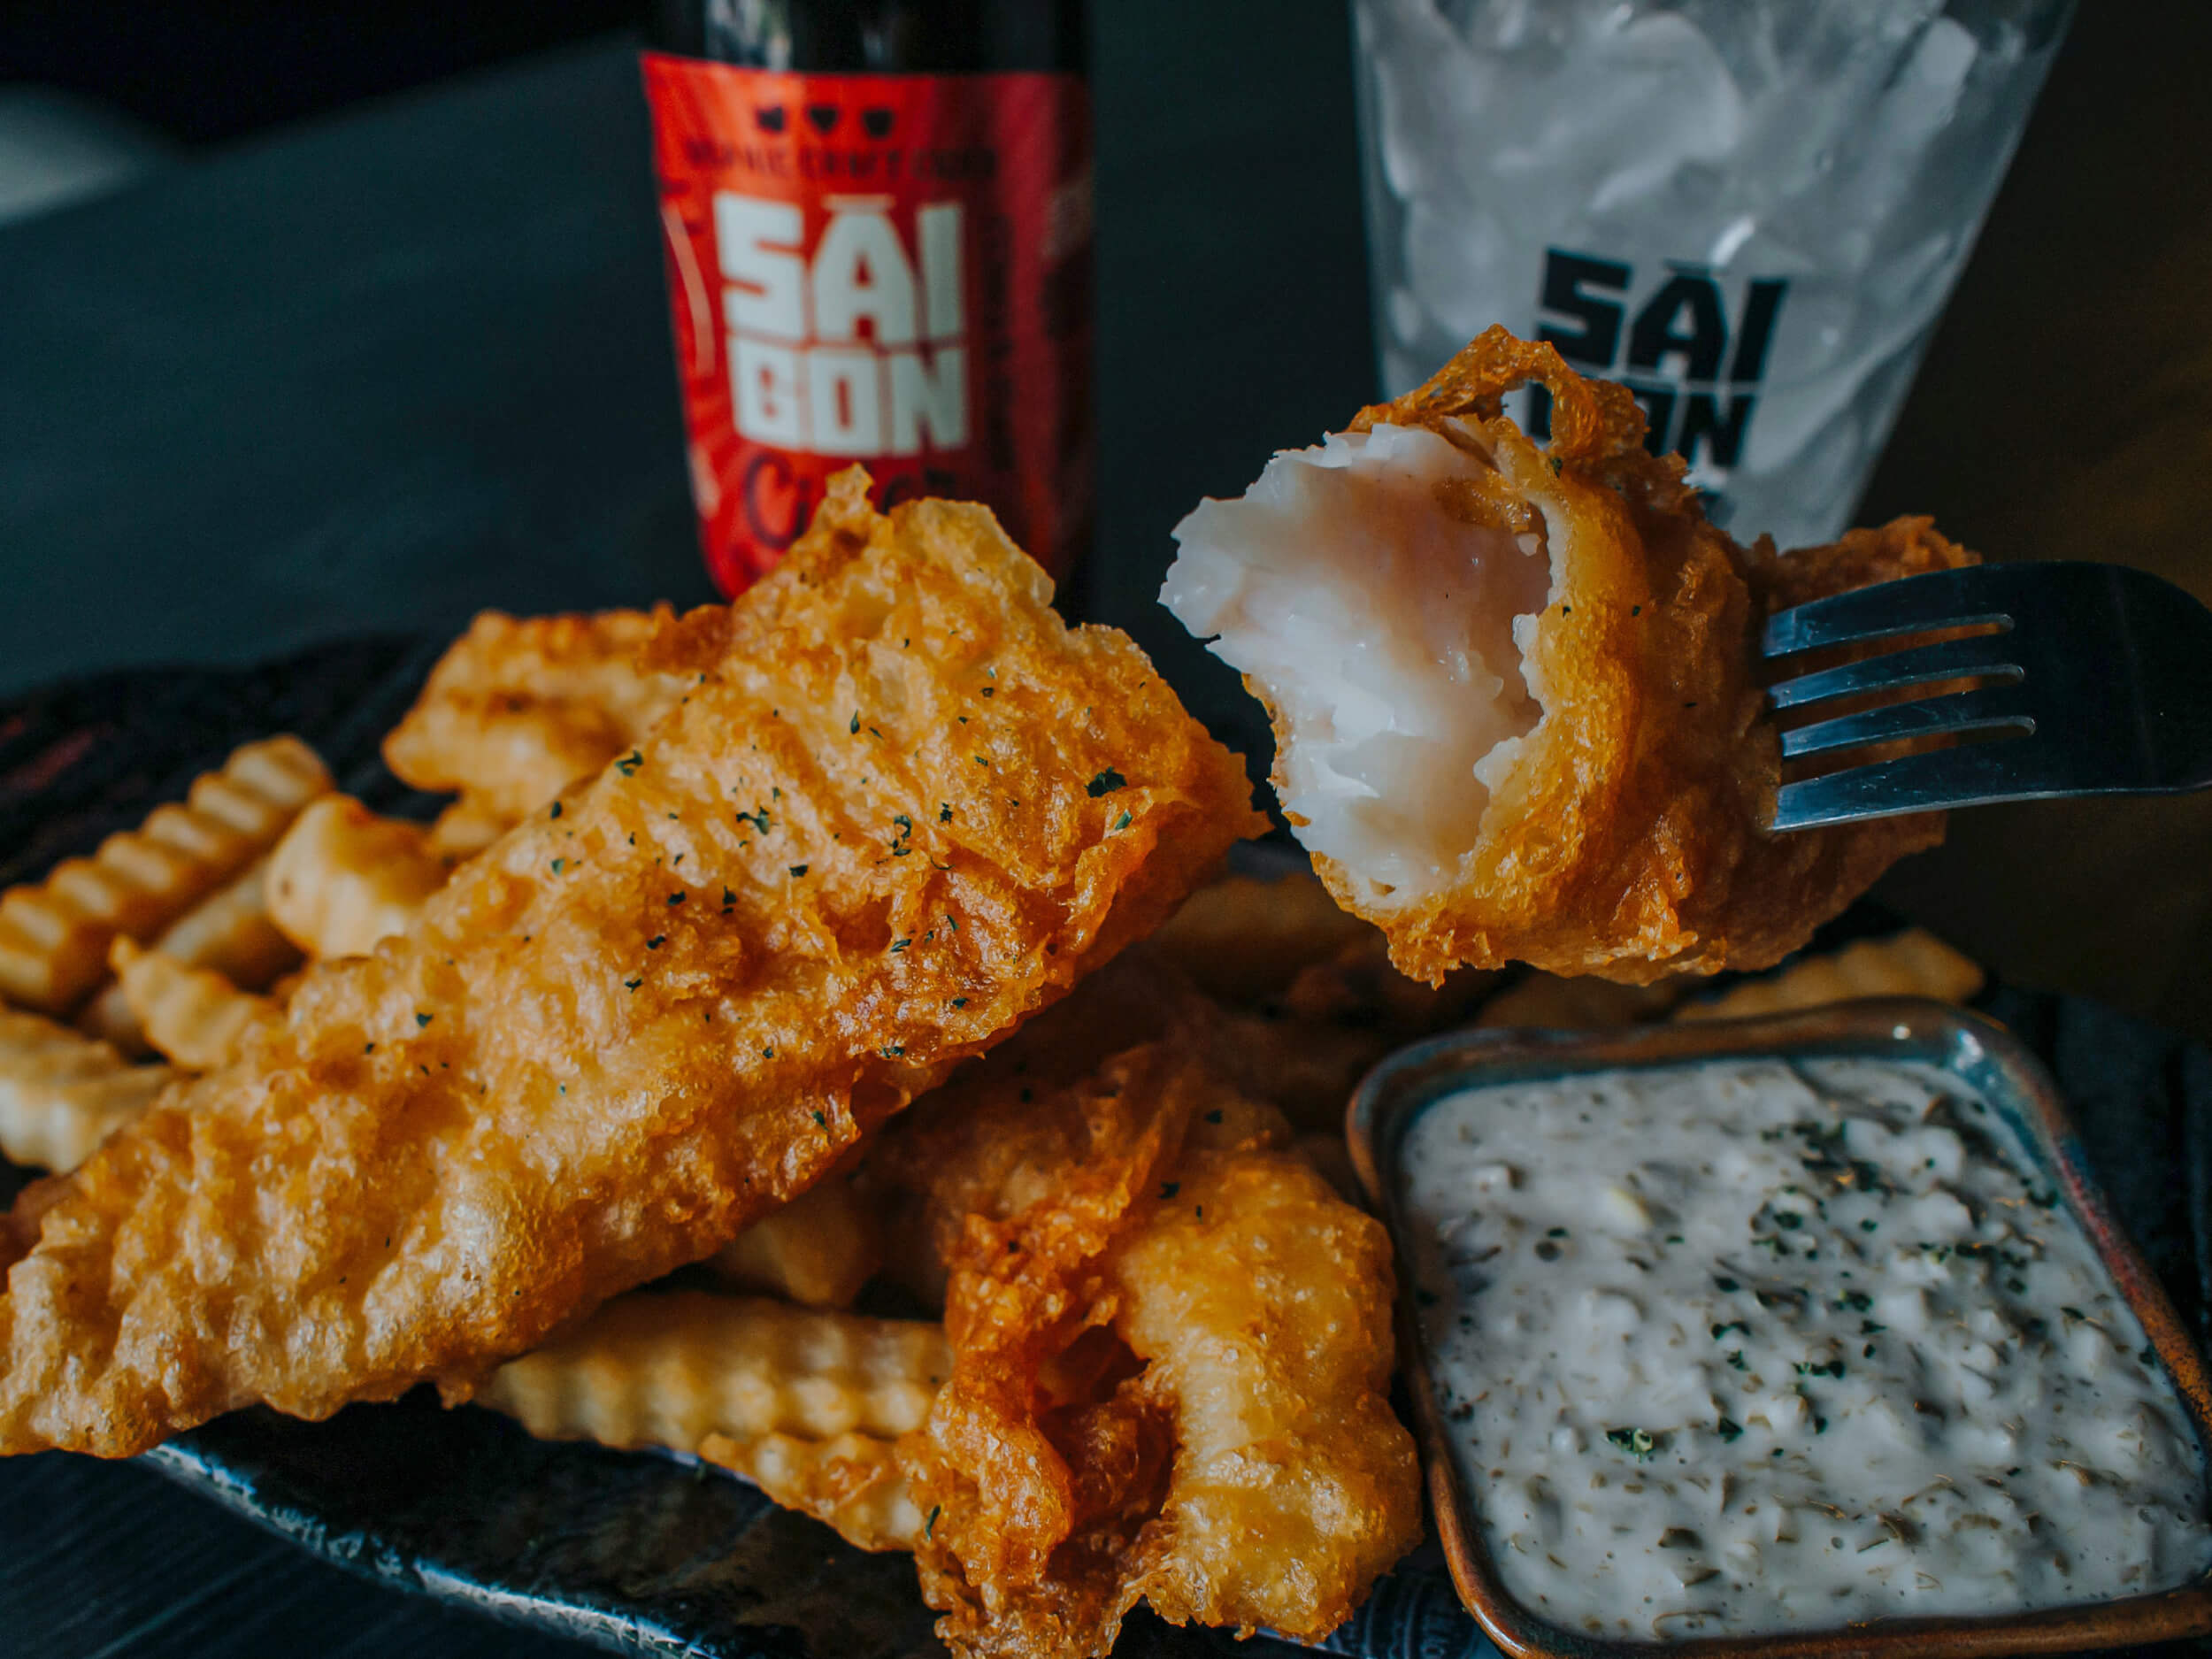 Where to eat the best fish and chips in London